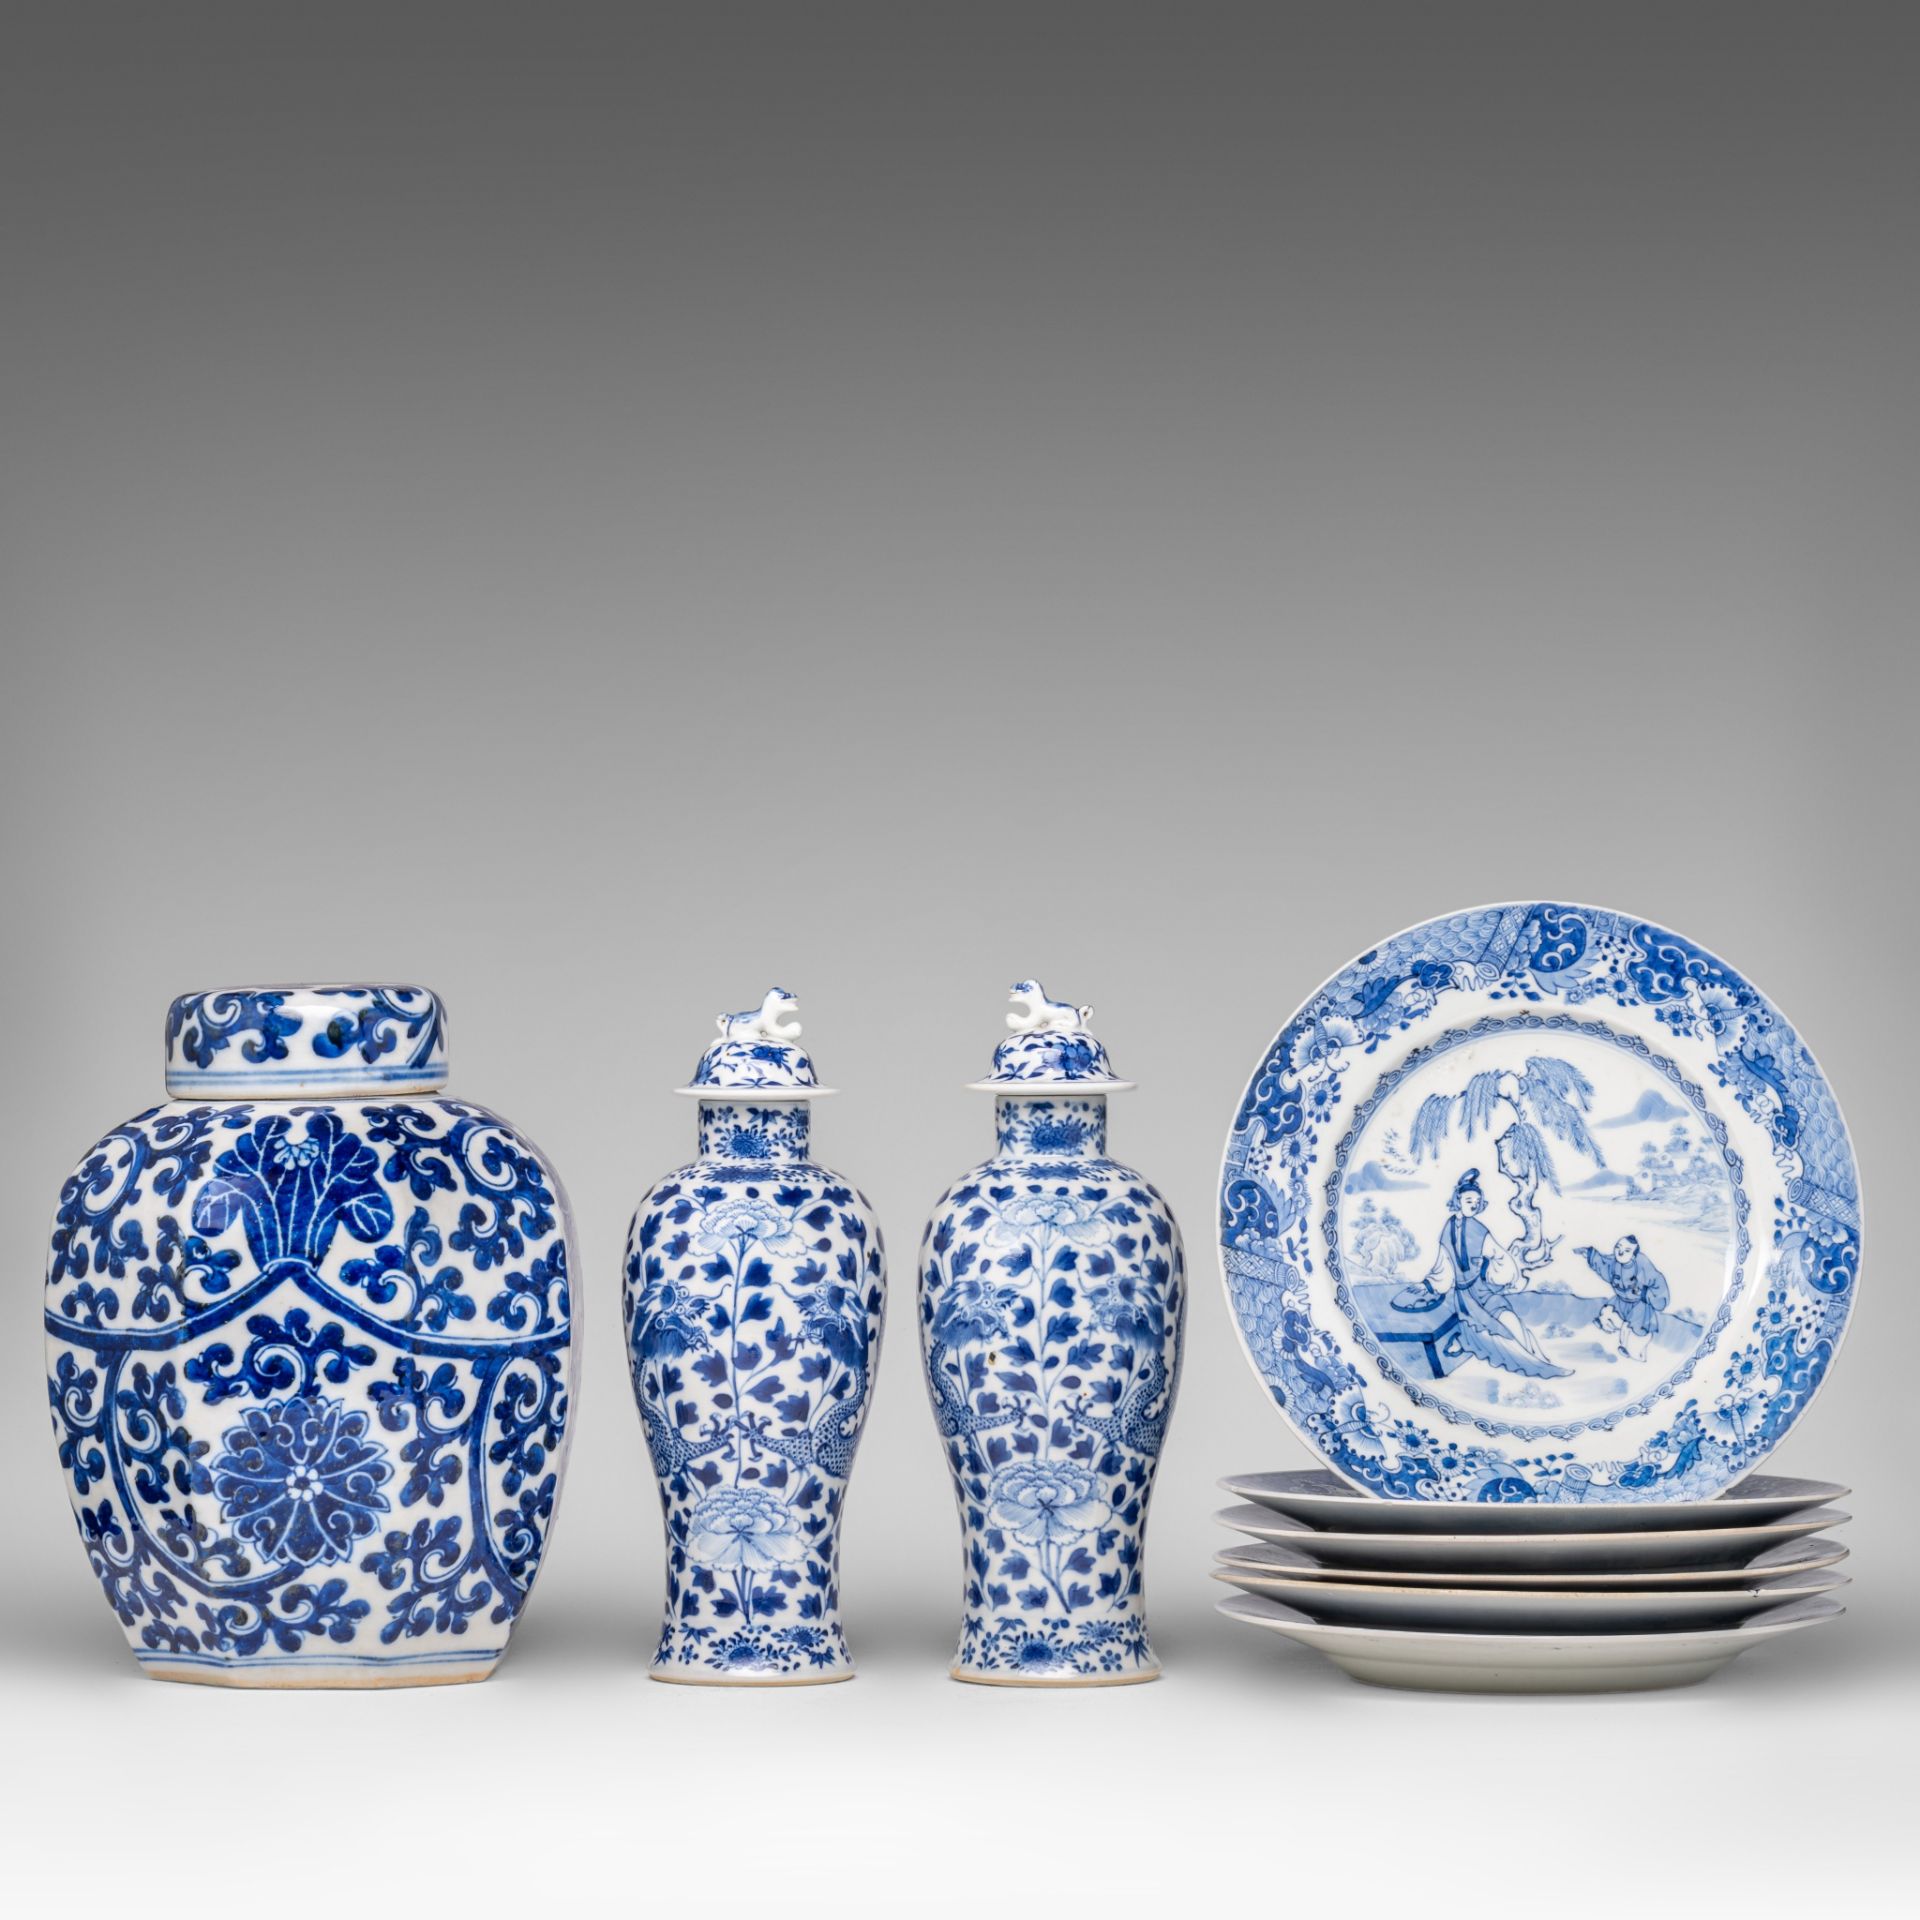 A small collection of Chinese blue and white lidded vases, 19thC, H 27 cm - added six Japanese Arita